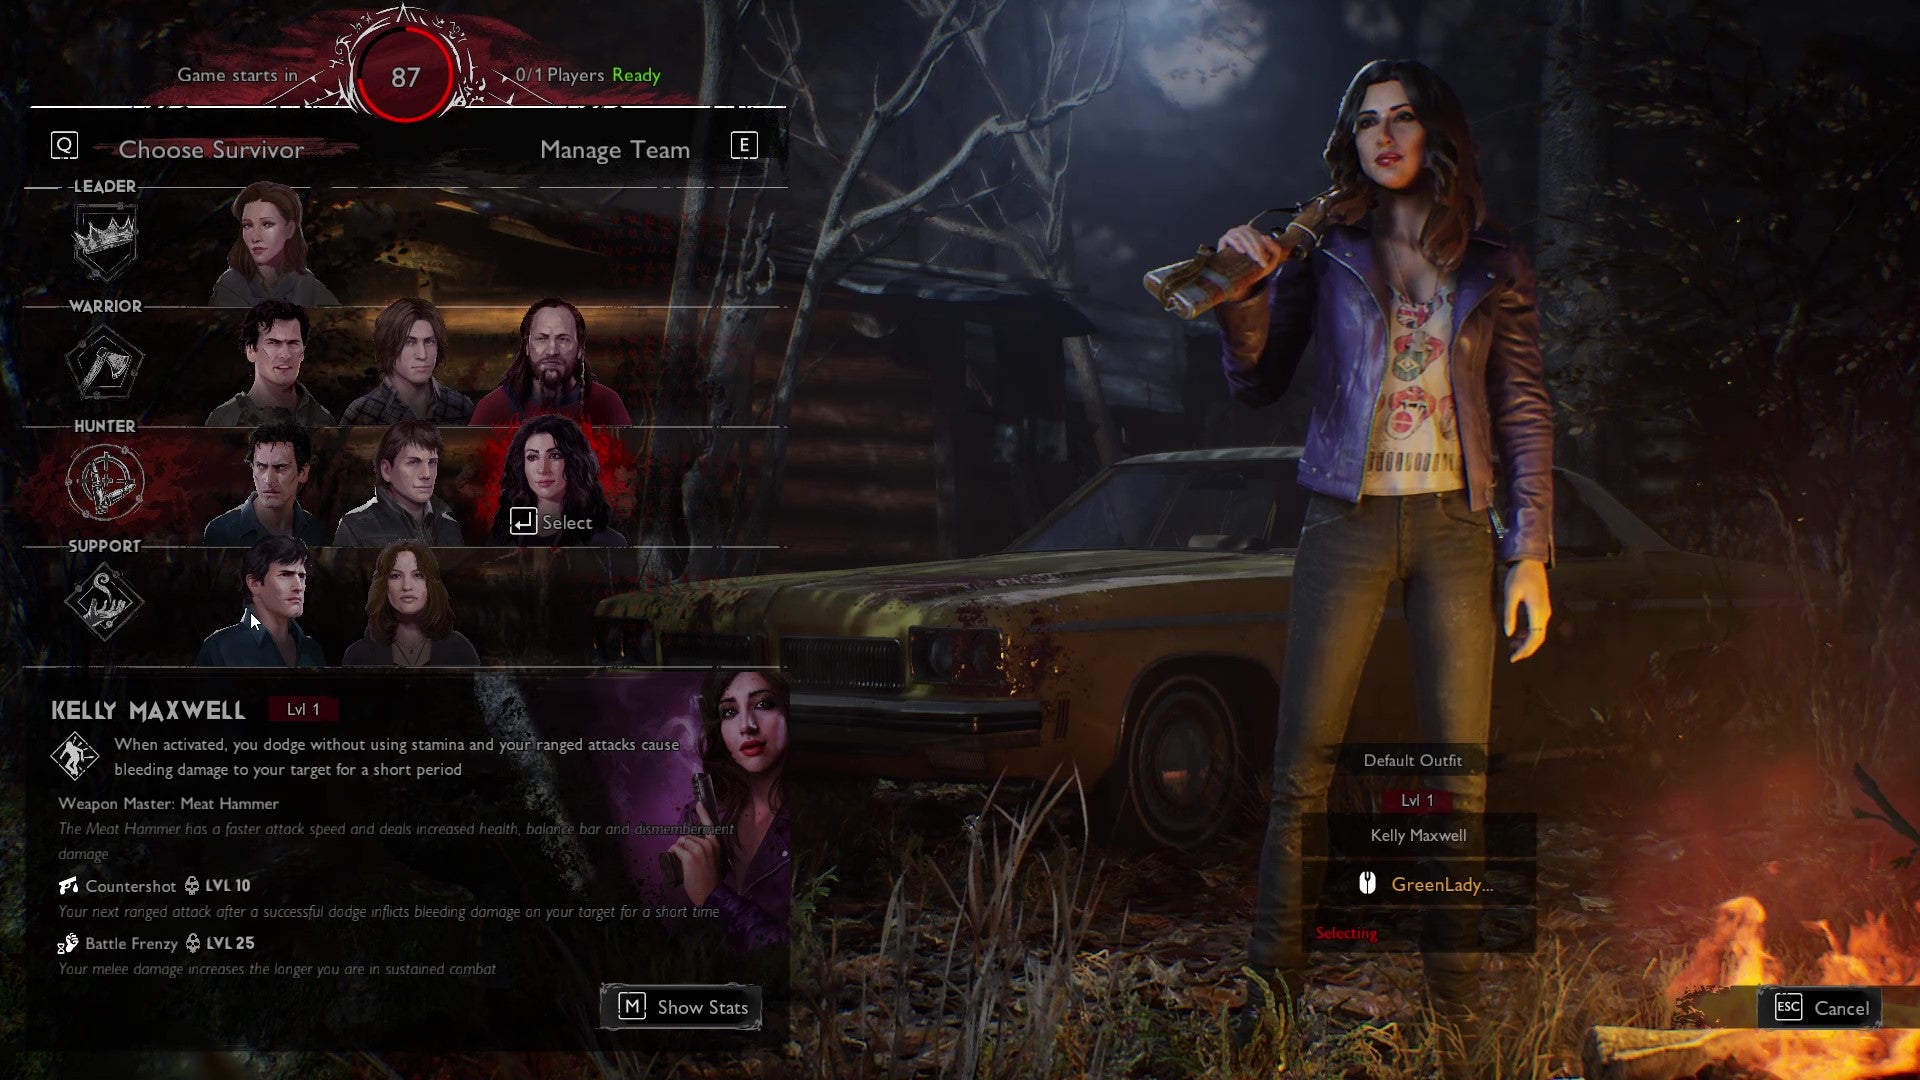 The player selection screen from Evil Dead: The Game, with Kelly Maxwell selected by a Survivor player.